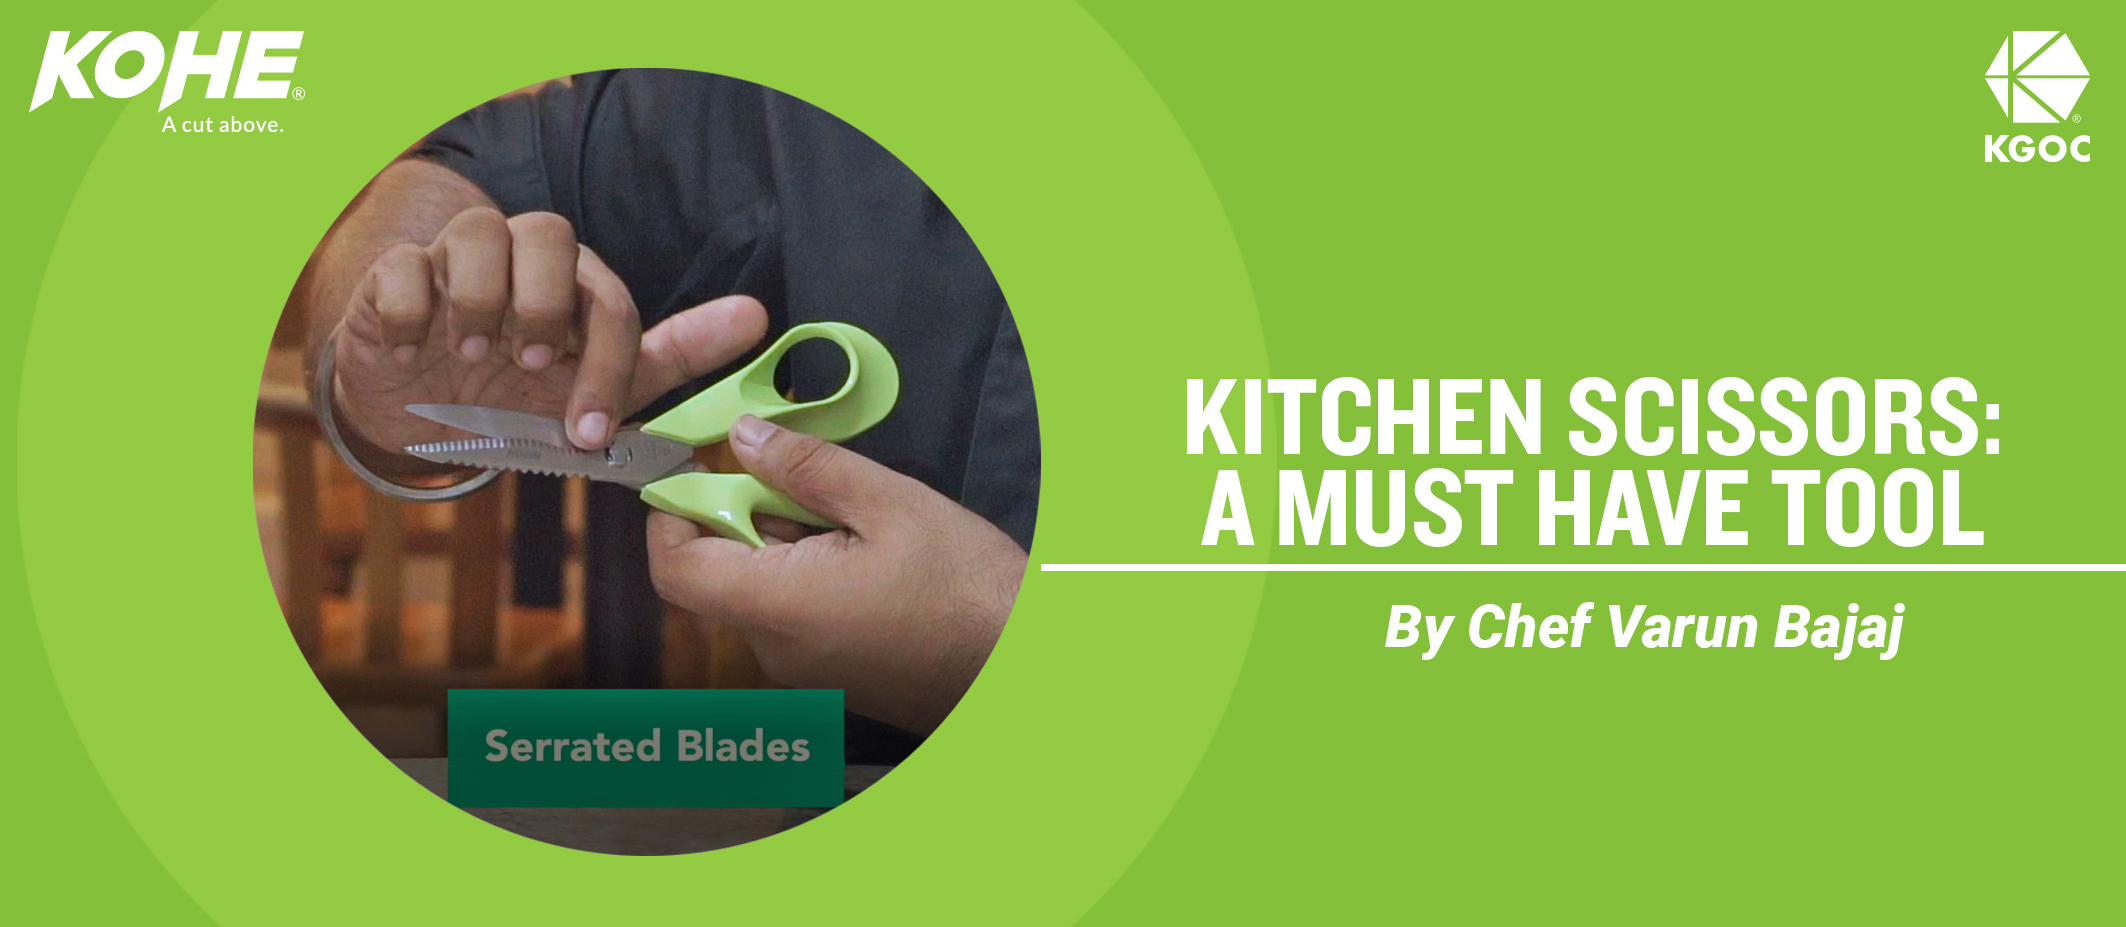 Kitchen Scissors: Why a must-have